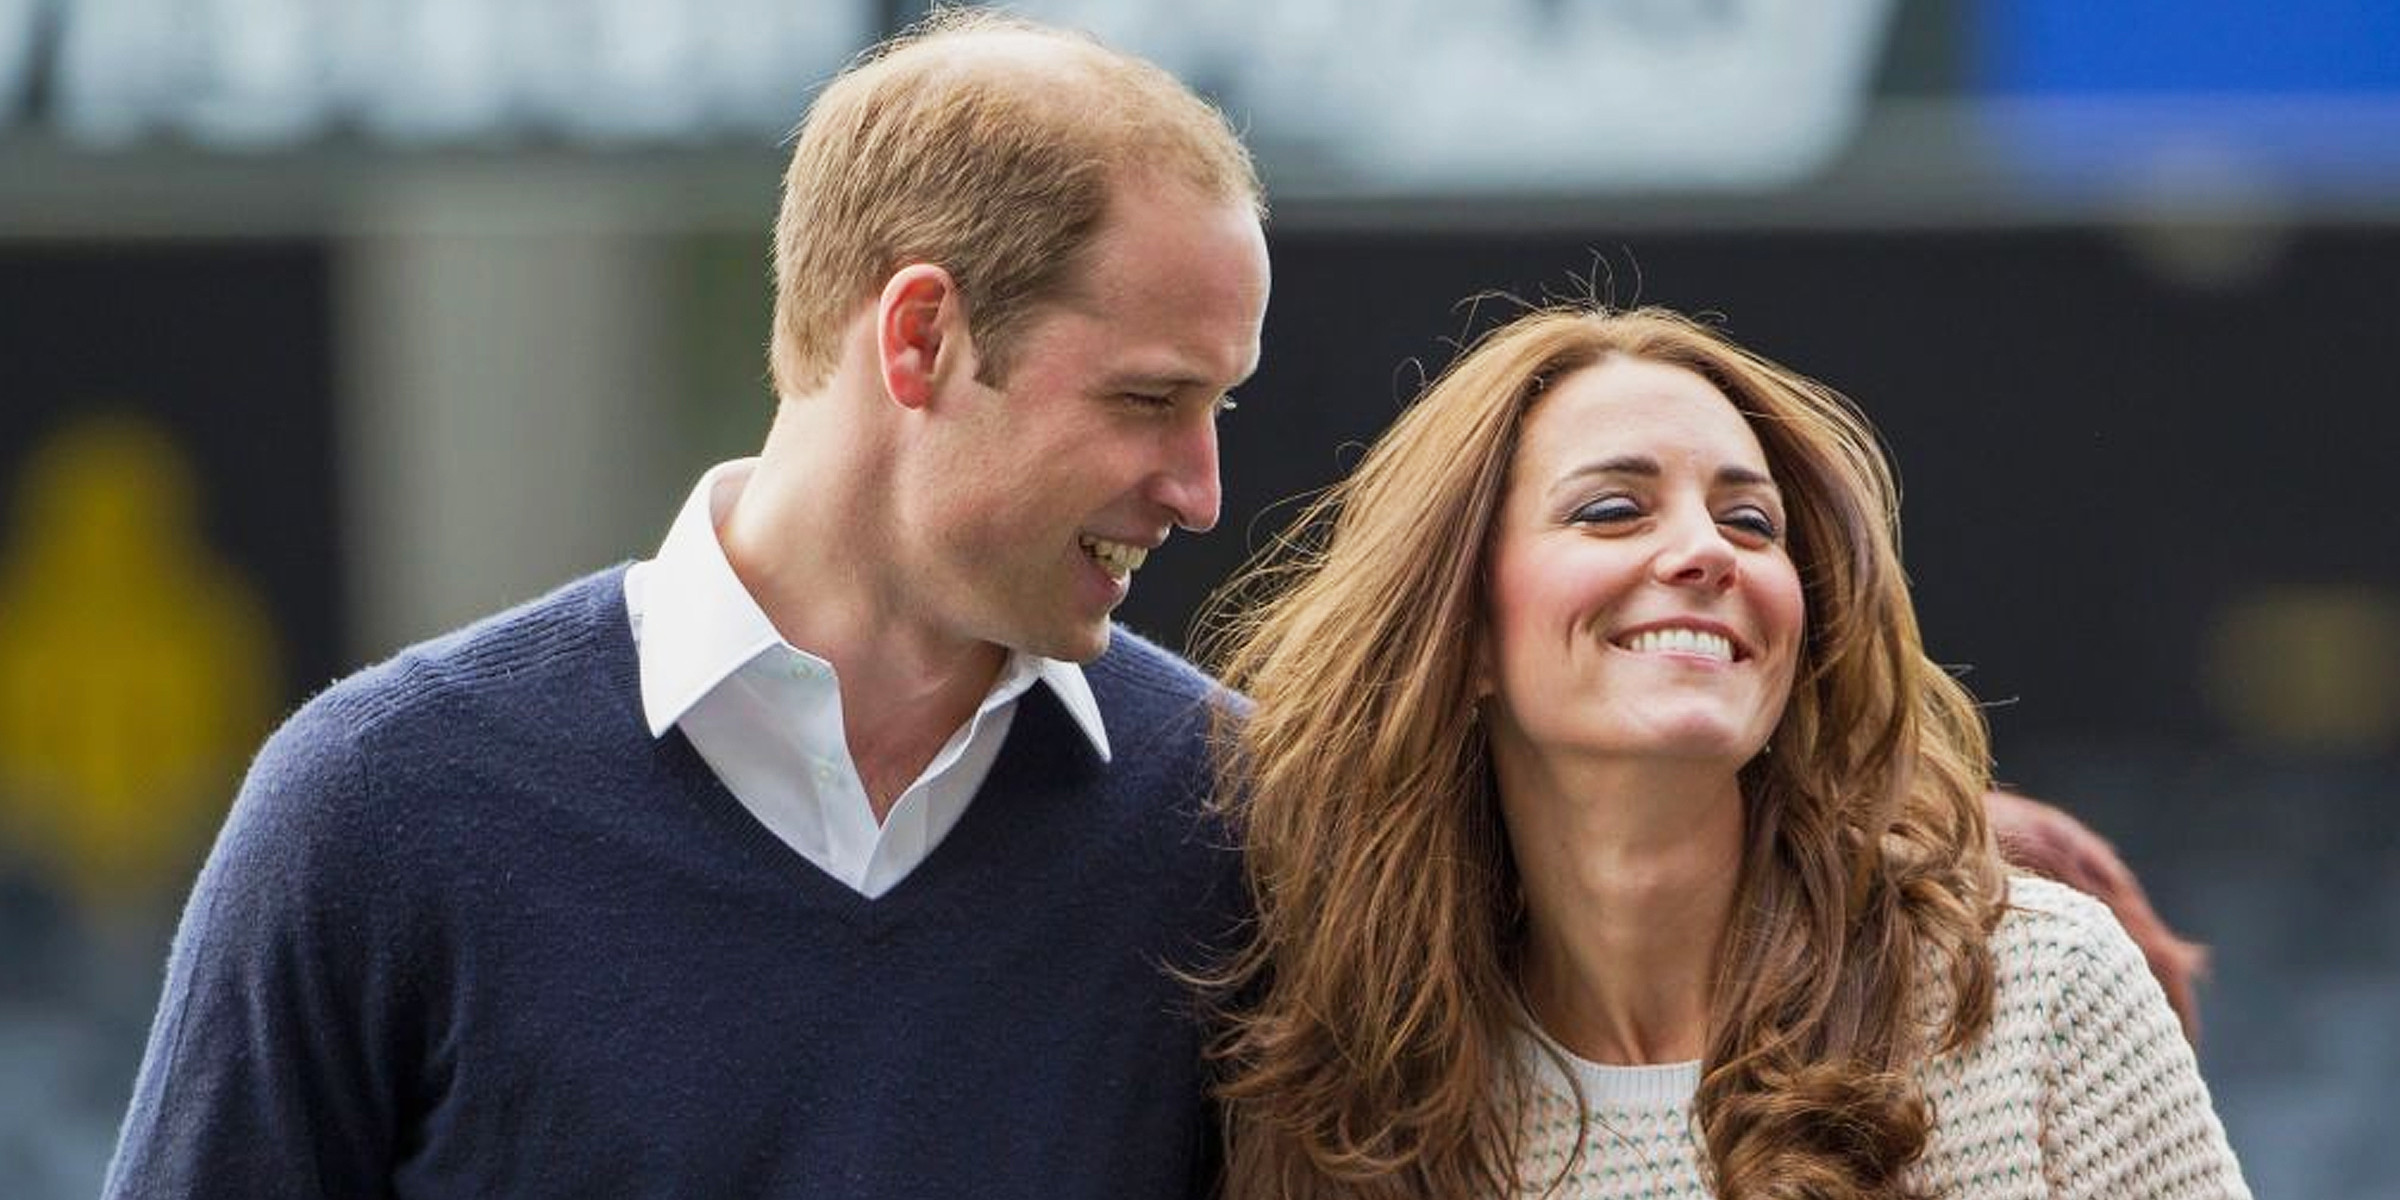 Prince William and Princess Catherine | Source: Getty Images